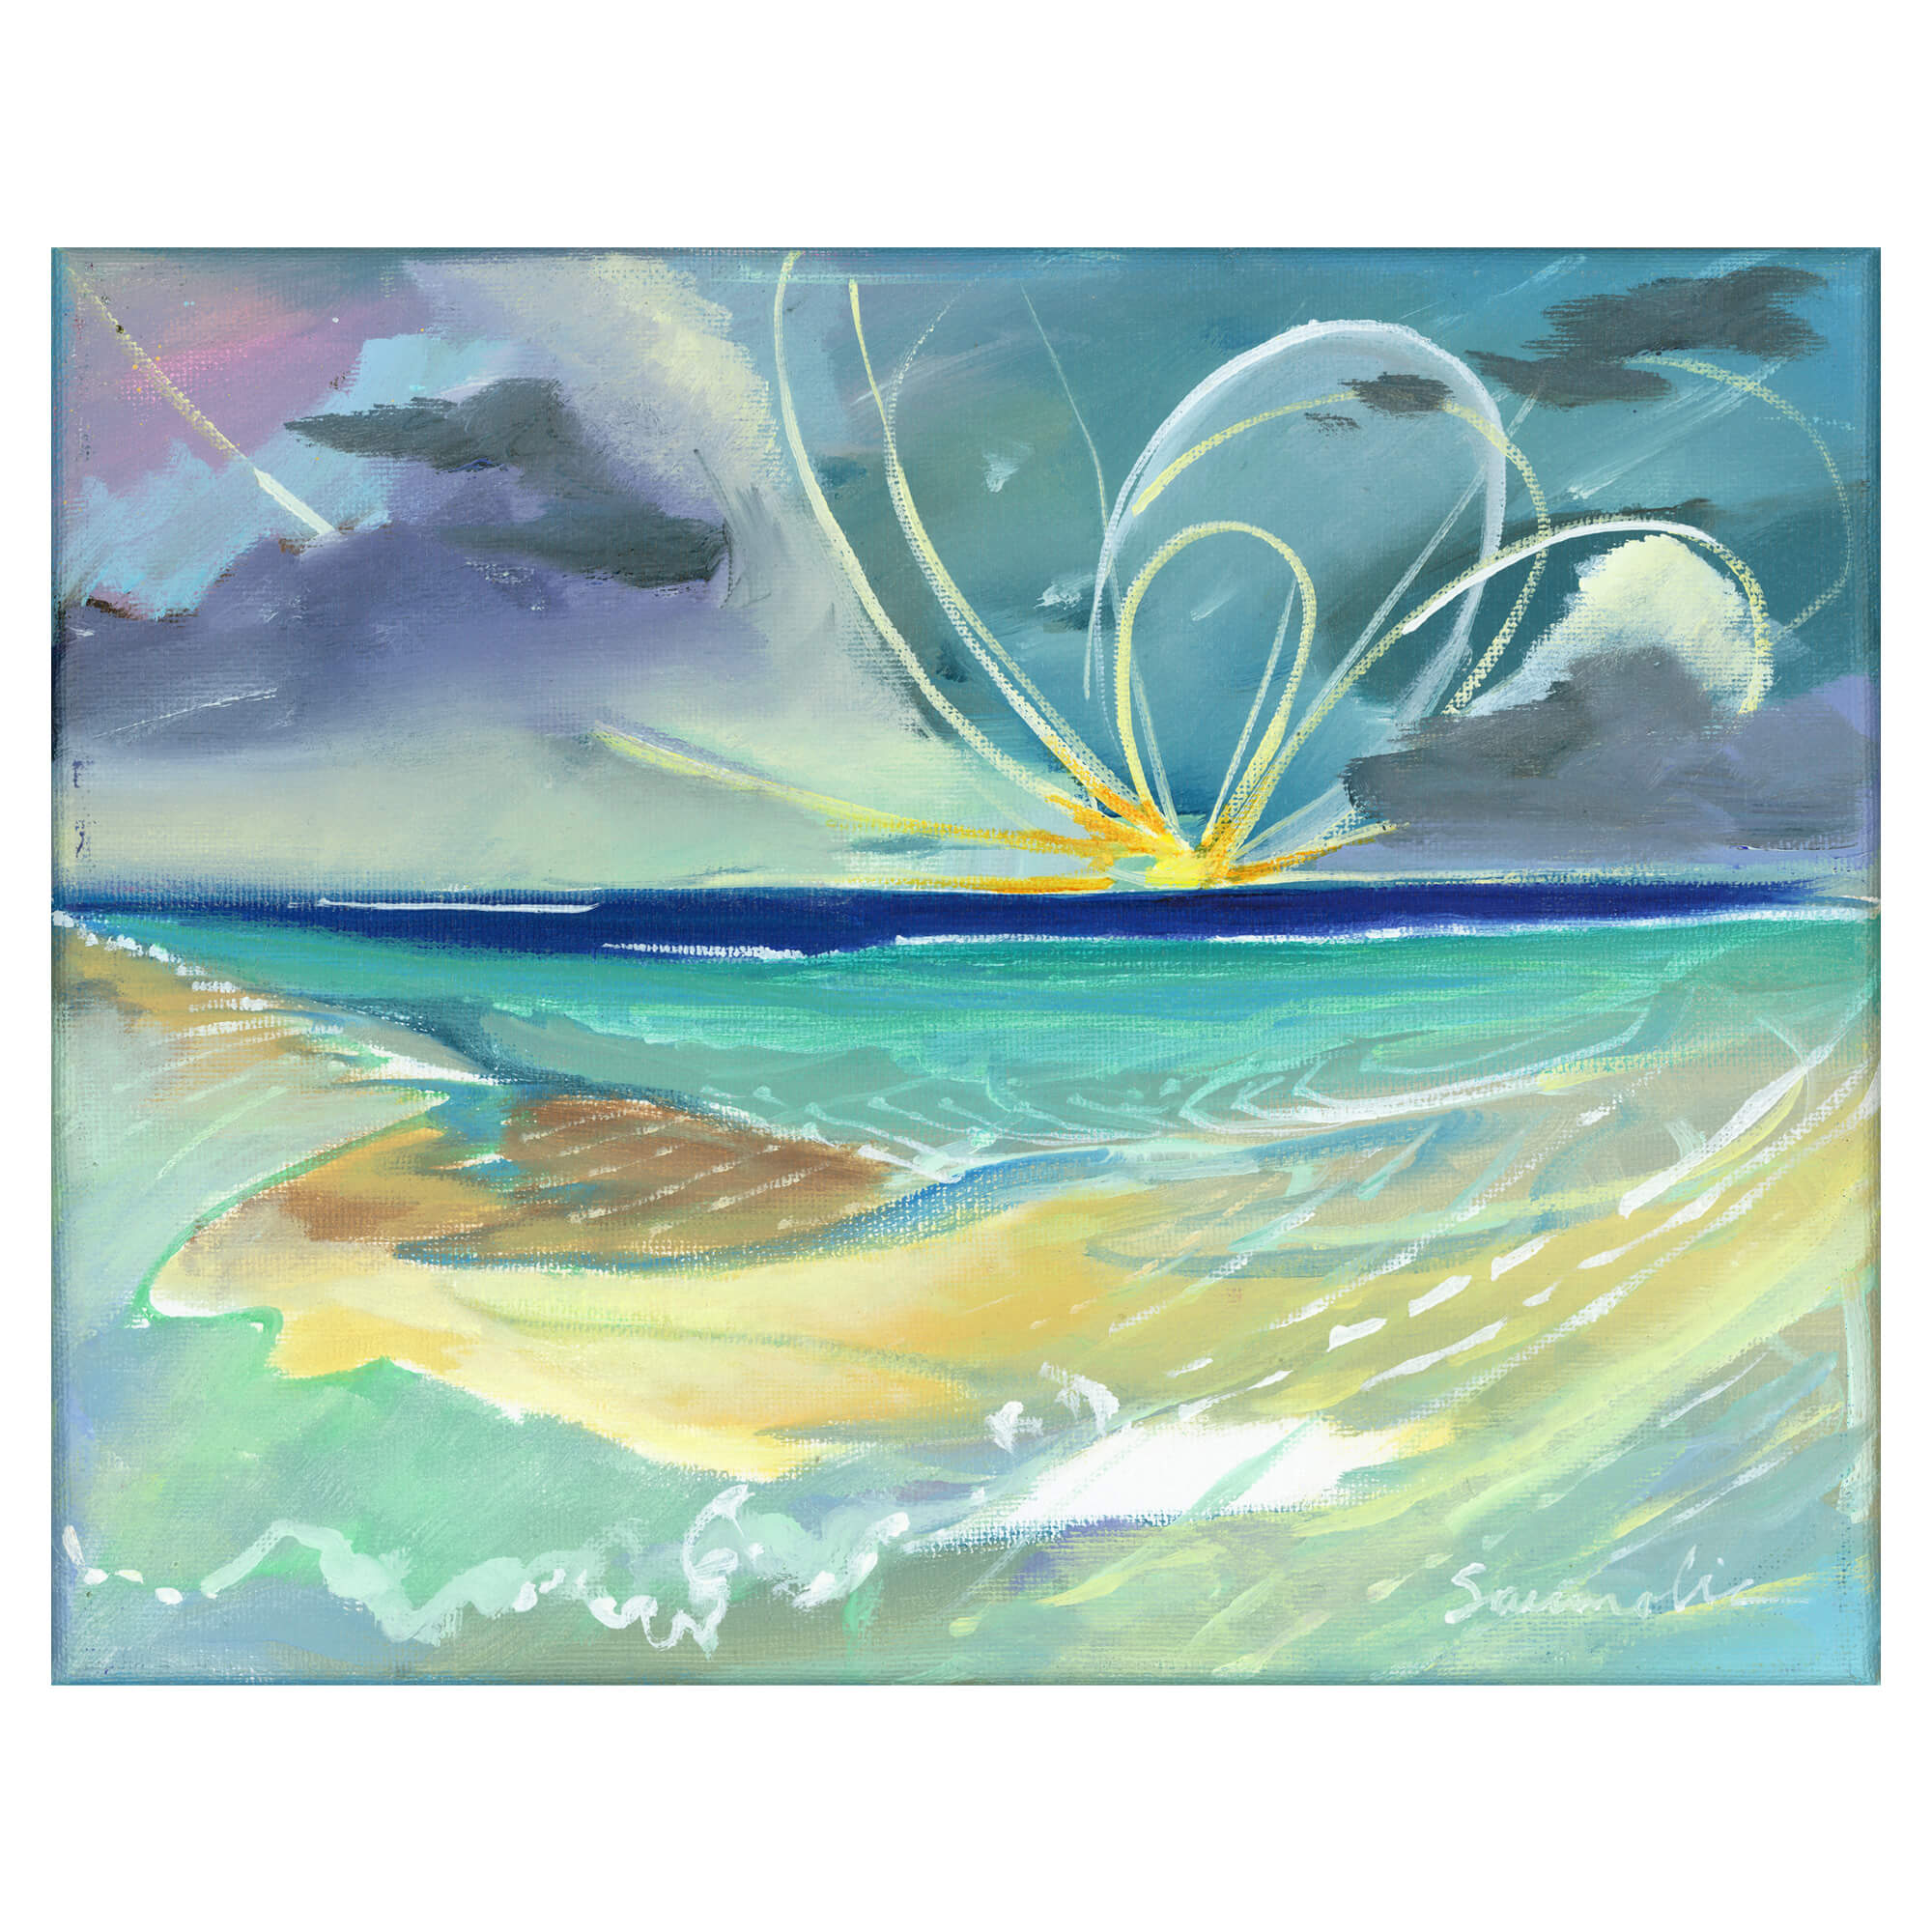 Teal and blue hued ocean with crashing waves and view of the sunset by Hawaii artist Saumolia Puapuaga